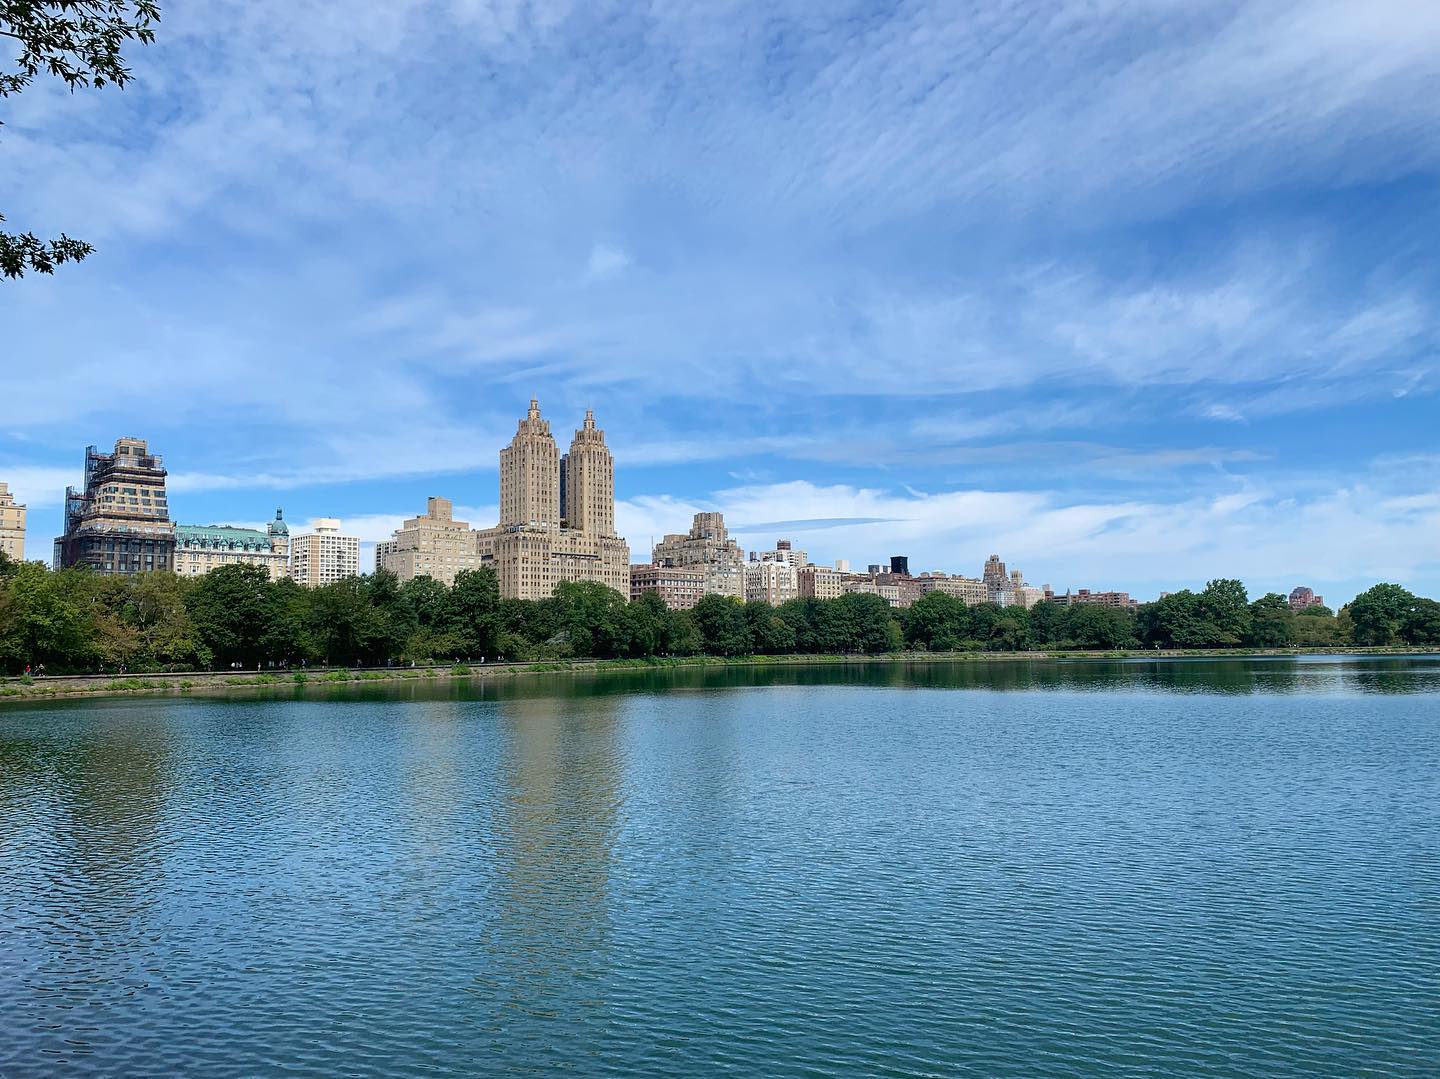 The Jacqueline Kennedy Onassis Reservoir is a decommissioned reservoir in Central Park in the borough of Manhattan, New York City, stretching from 86th to 96th Streets.
.
#newyork #centralpark #park #onassis #jacquelinekennedyonassis #lake #usa #ny #travel #traveller #traveler #traveling #travelling #travelblogger #travelblog #manhattan #bestofnewyork #newyorkcity #nyc #bluesky #sunnyday #wonderful_places #wonderful #city #beautifulplaces